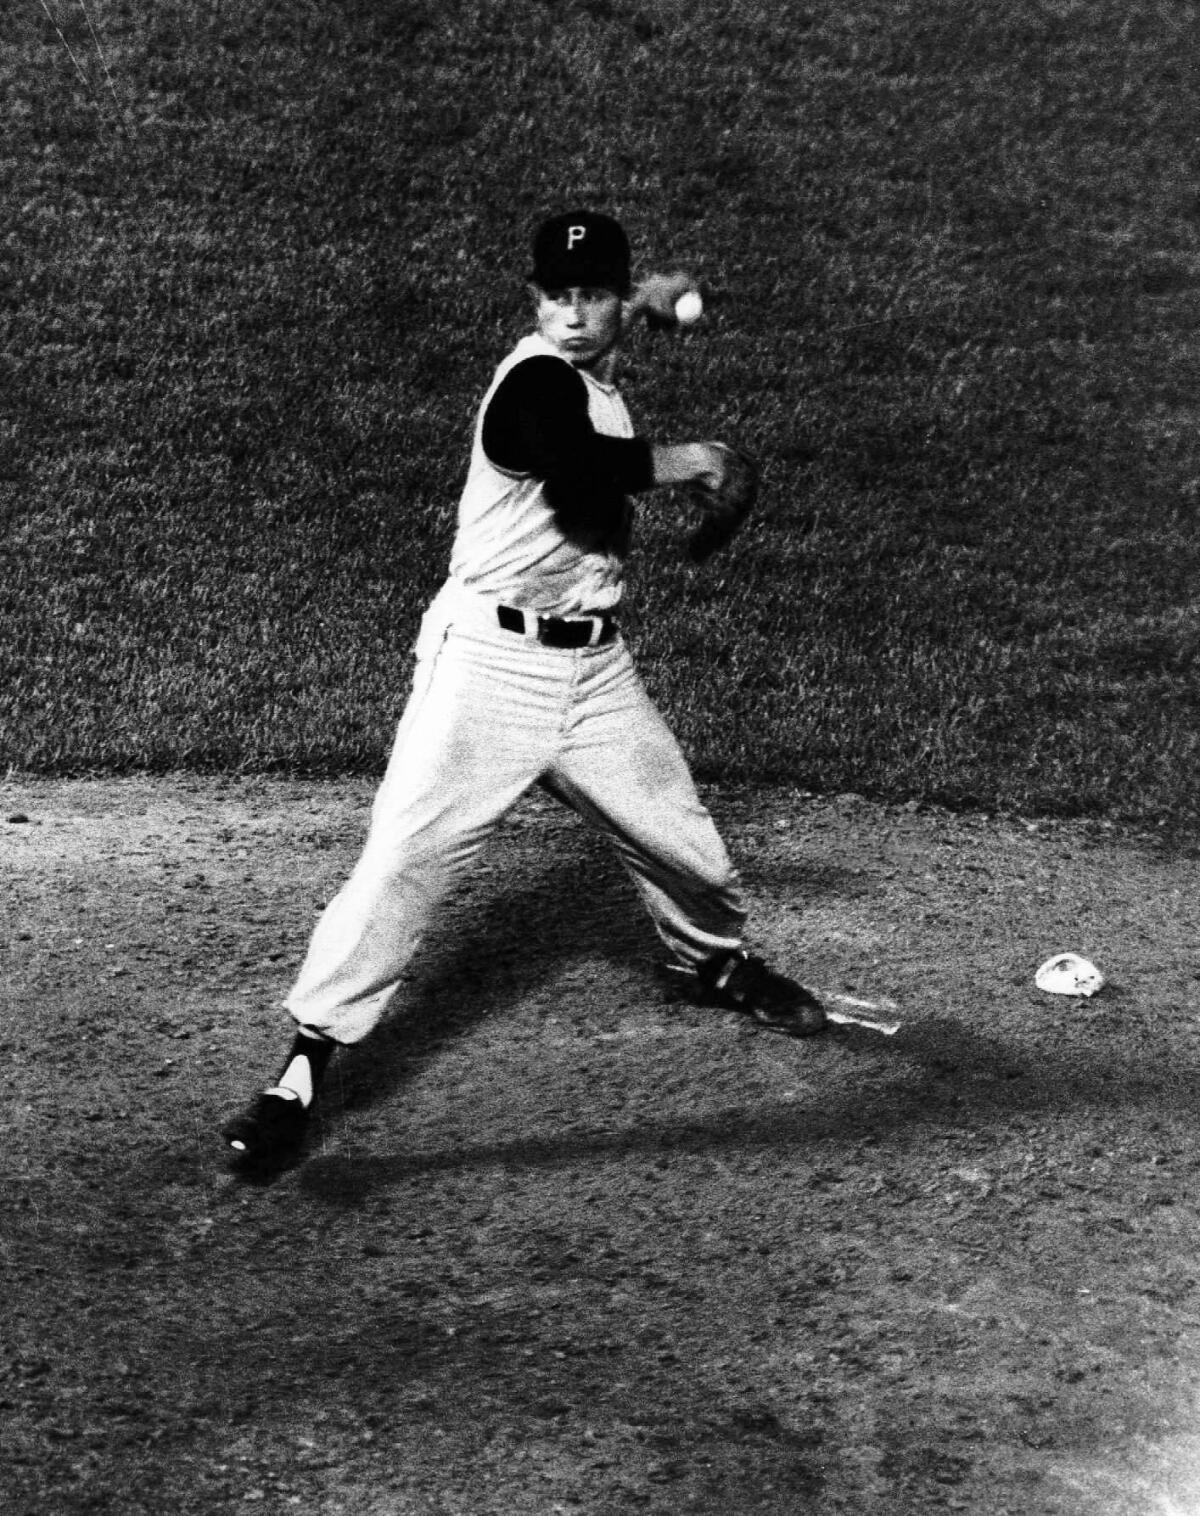 Pittsburgh Pirates pitcher Harvey Haddix throws during one of his 12 perfect innings against the Milwaukee Braves on May 26, 1959, in Milwaukee. Haddix was perfect through 12 but ended up losing the game in the 13th, 1-0. 